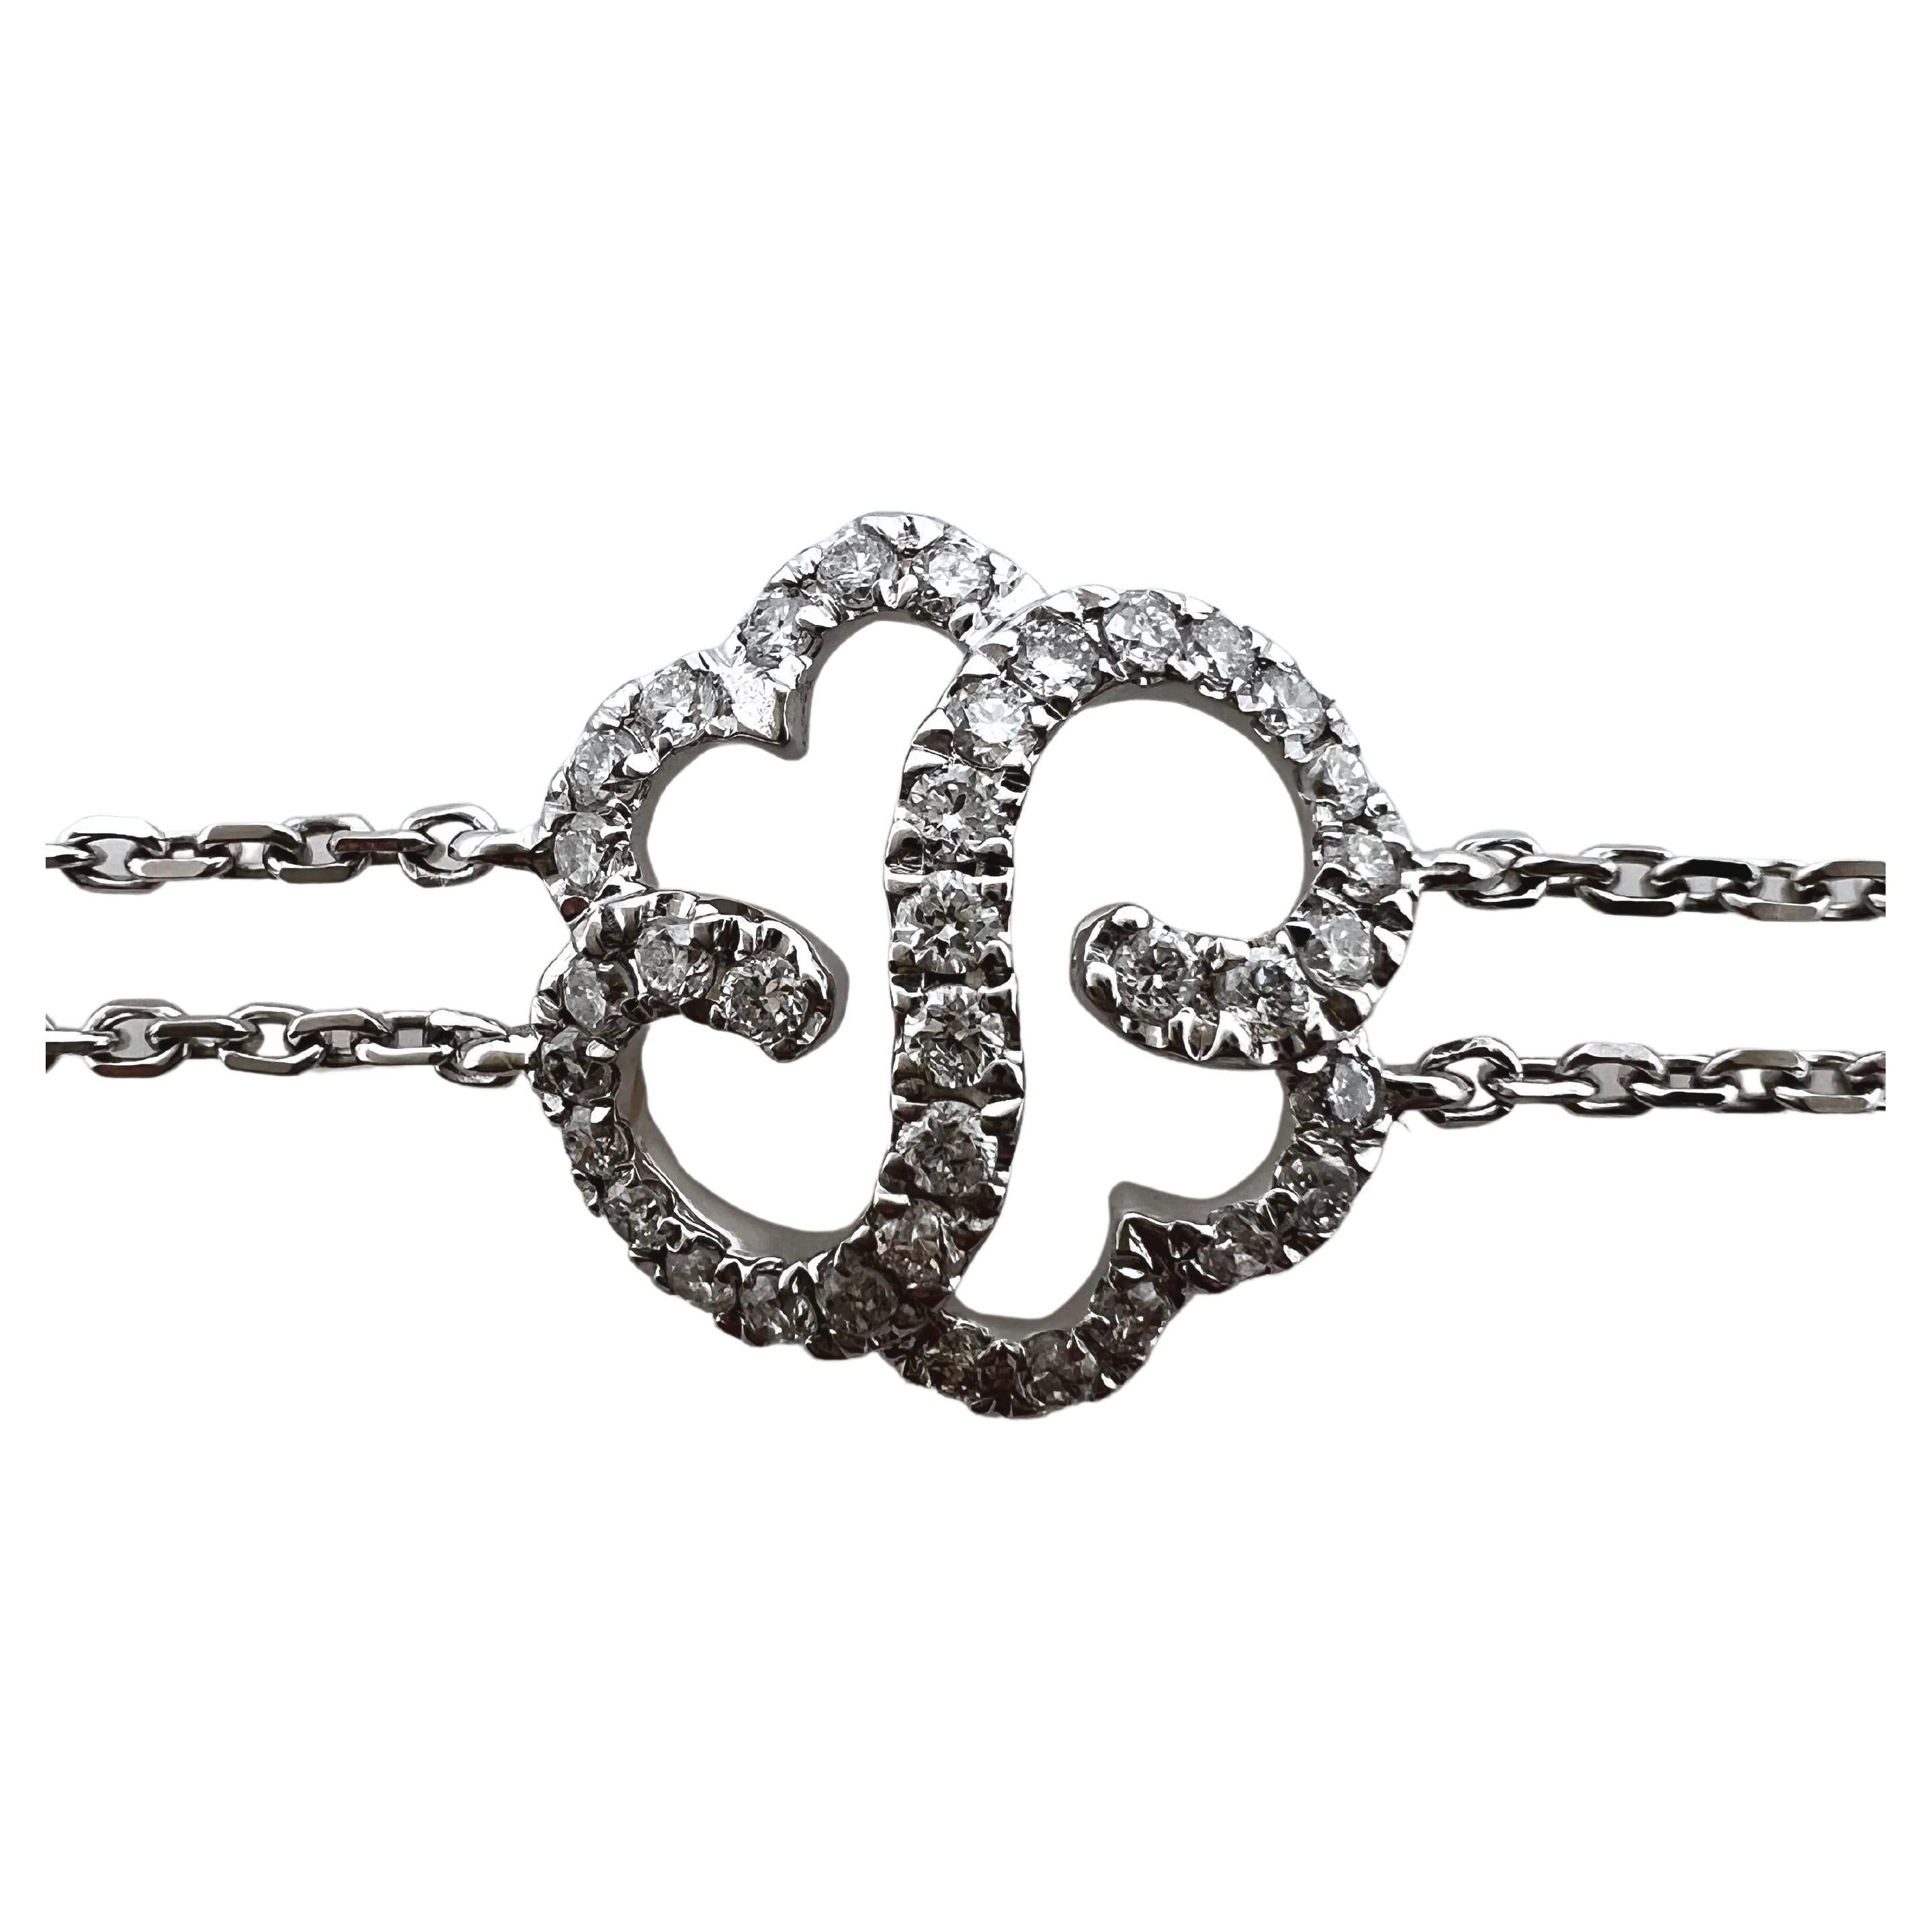 This elegant and dainty diamond bracelet is made for the daily wear.  It has a double strand of 18k white gold chains that link up the center diamond floral design.  The round diamonds comprise the pattern and has adjustable jump rings so that it